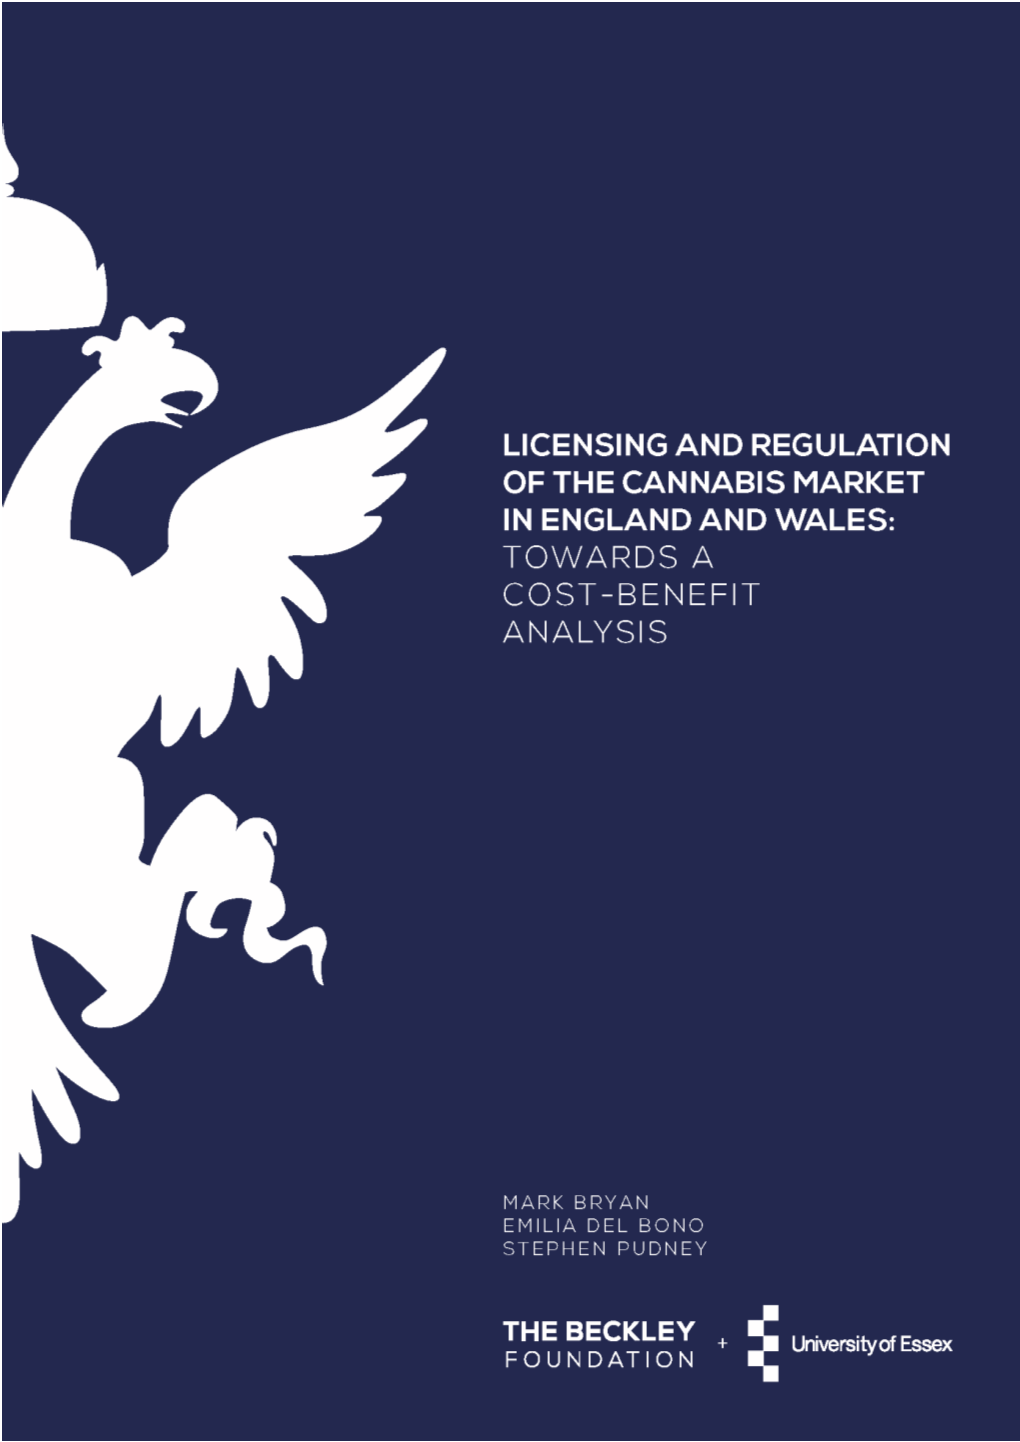 Licensing and Regulation of the Cannabis Market in England and Wales: Towards a Cost-Benefit Analysis